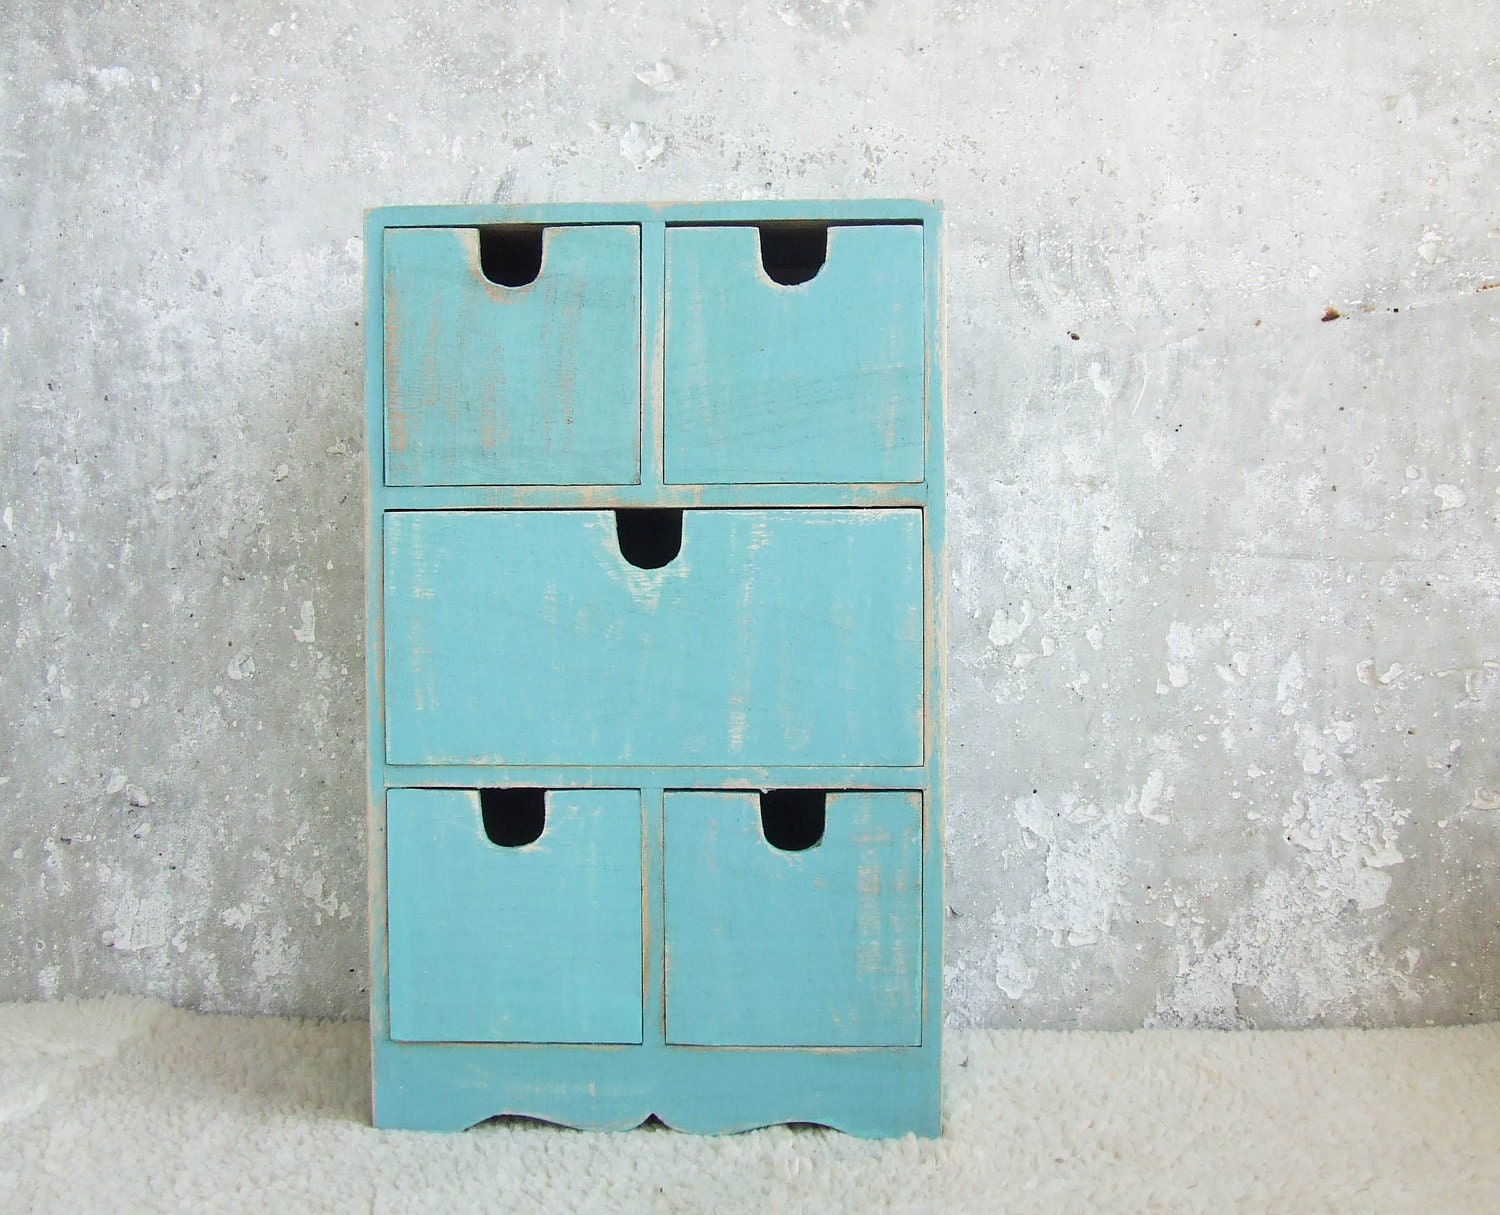 Aquamarine Ultramarine Green vintage  Decor, Rustic Wooden Keepsake with 5 drawers, can be personalized at your order, gift for her - Grimme